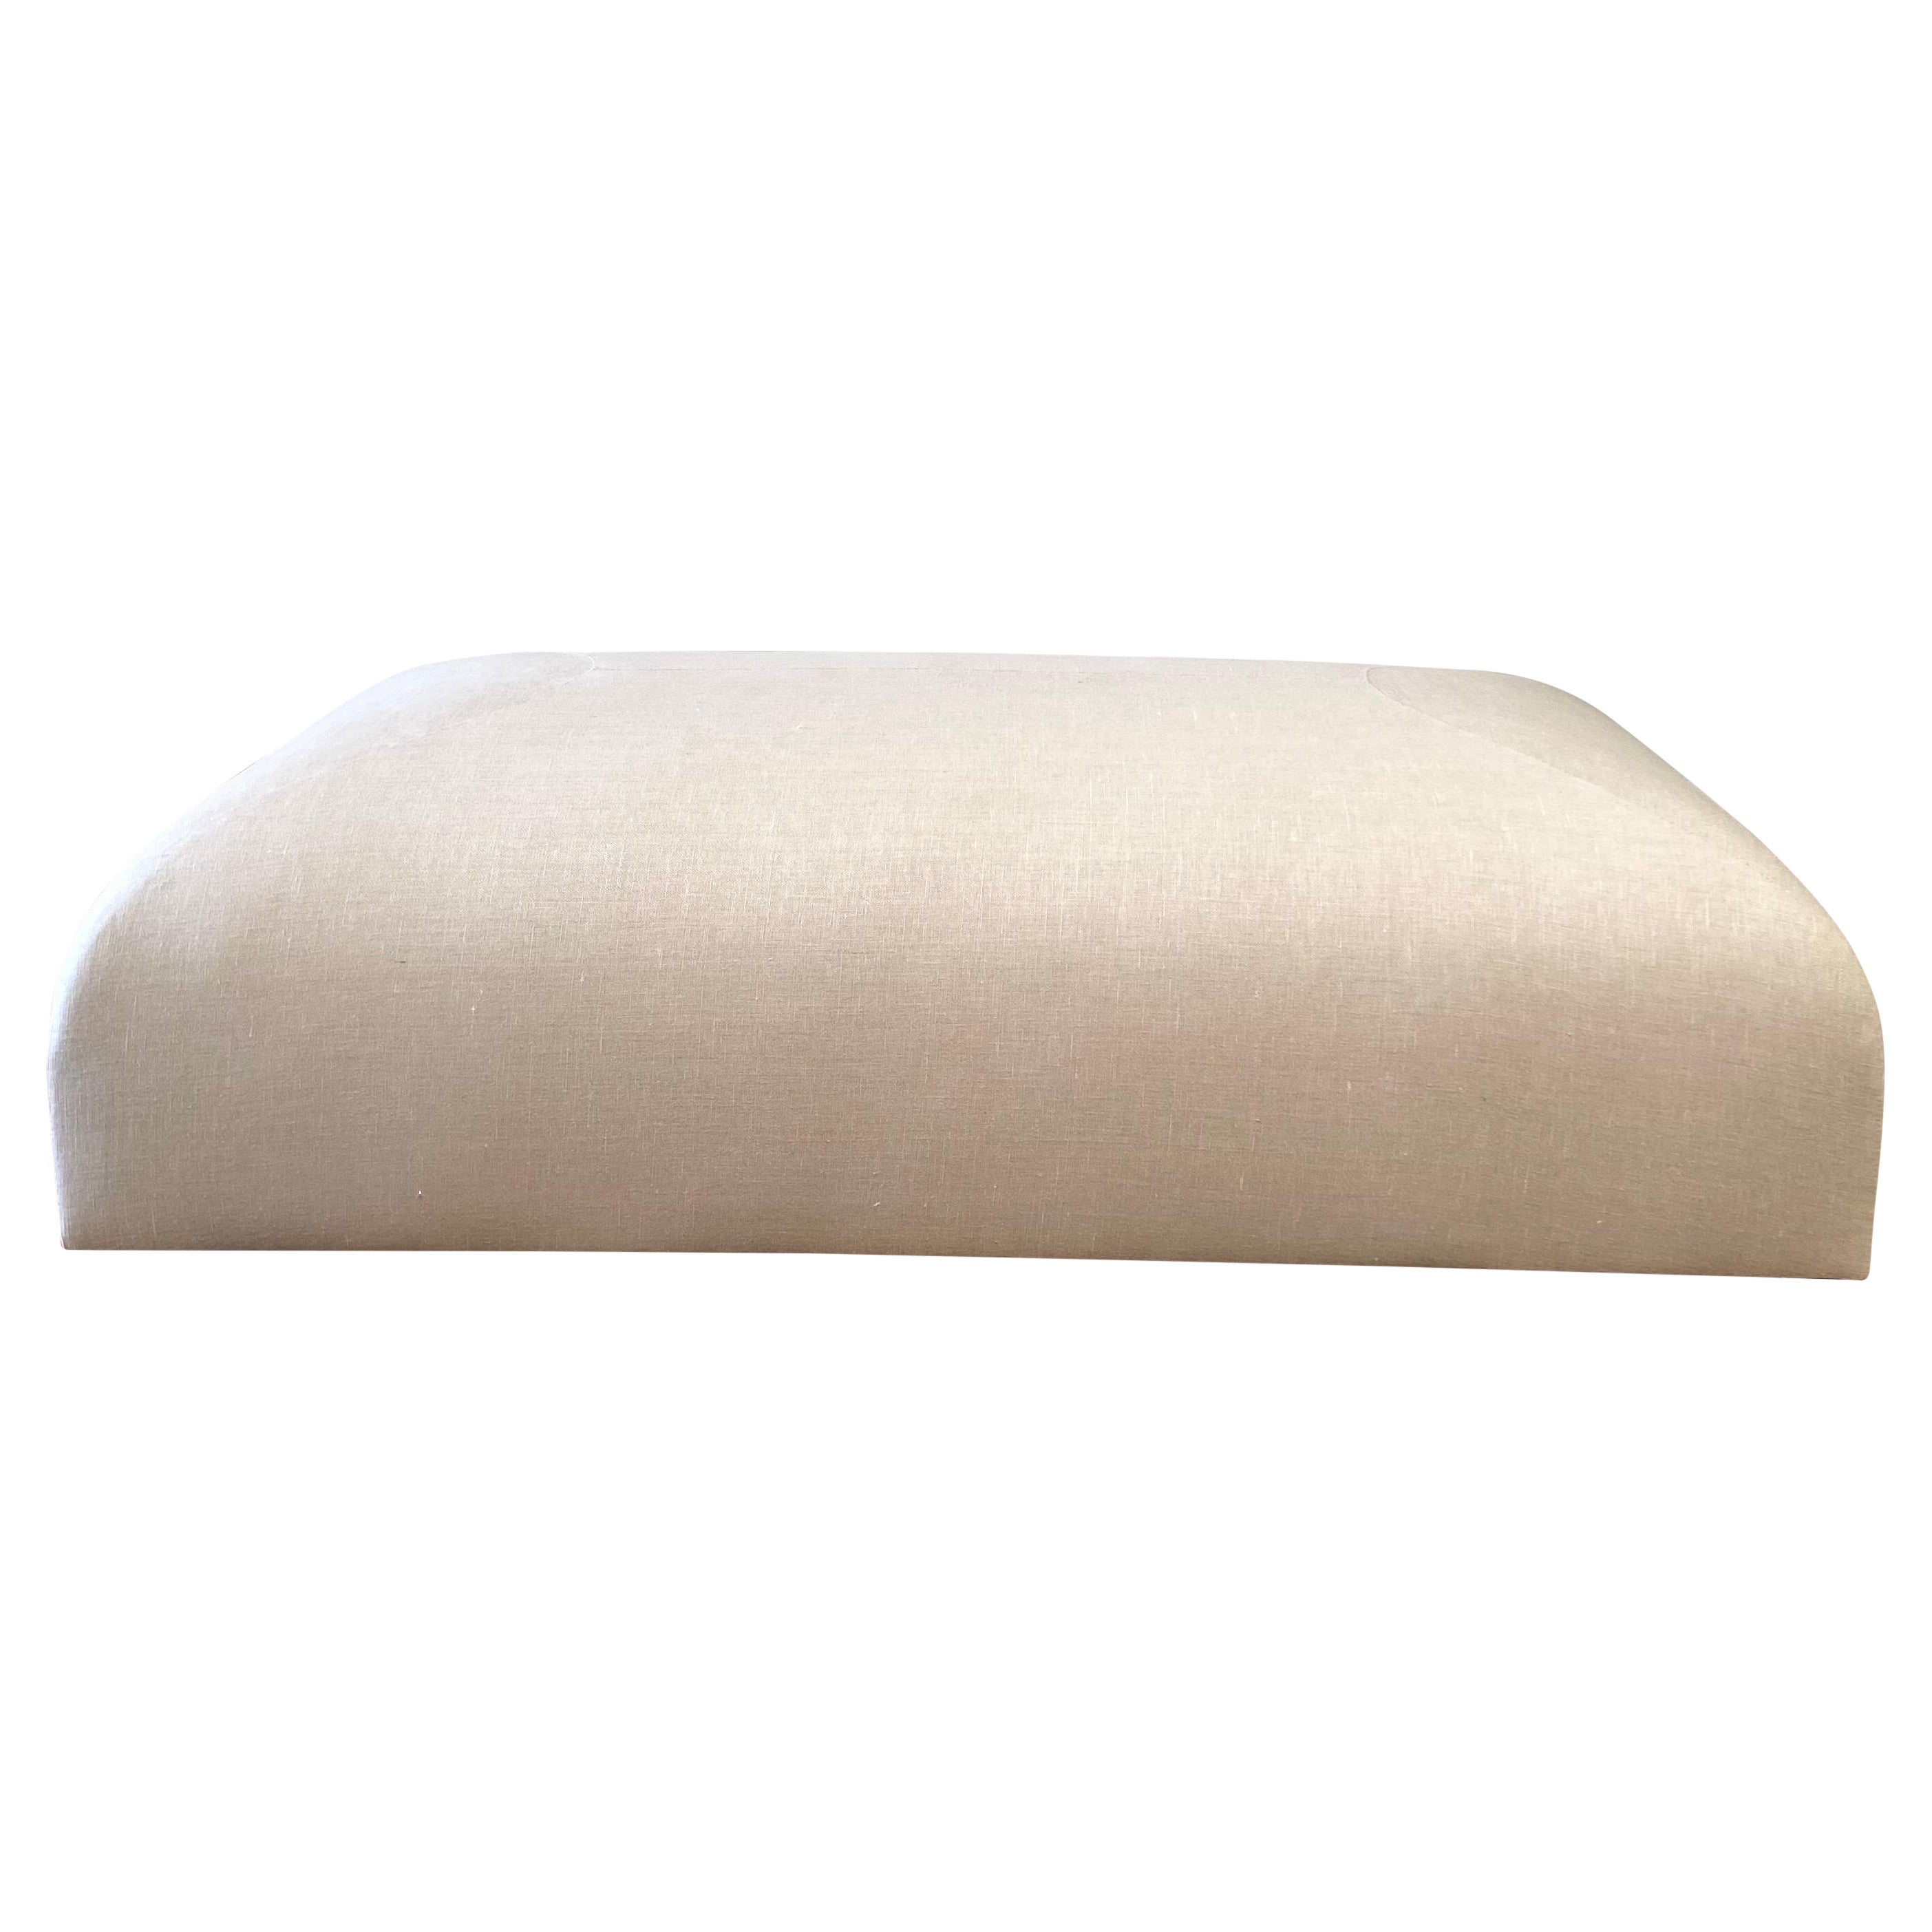 Custom Made Linen Ottoman with Rounded Corners